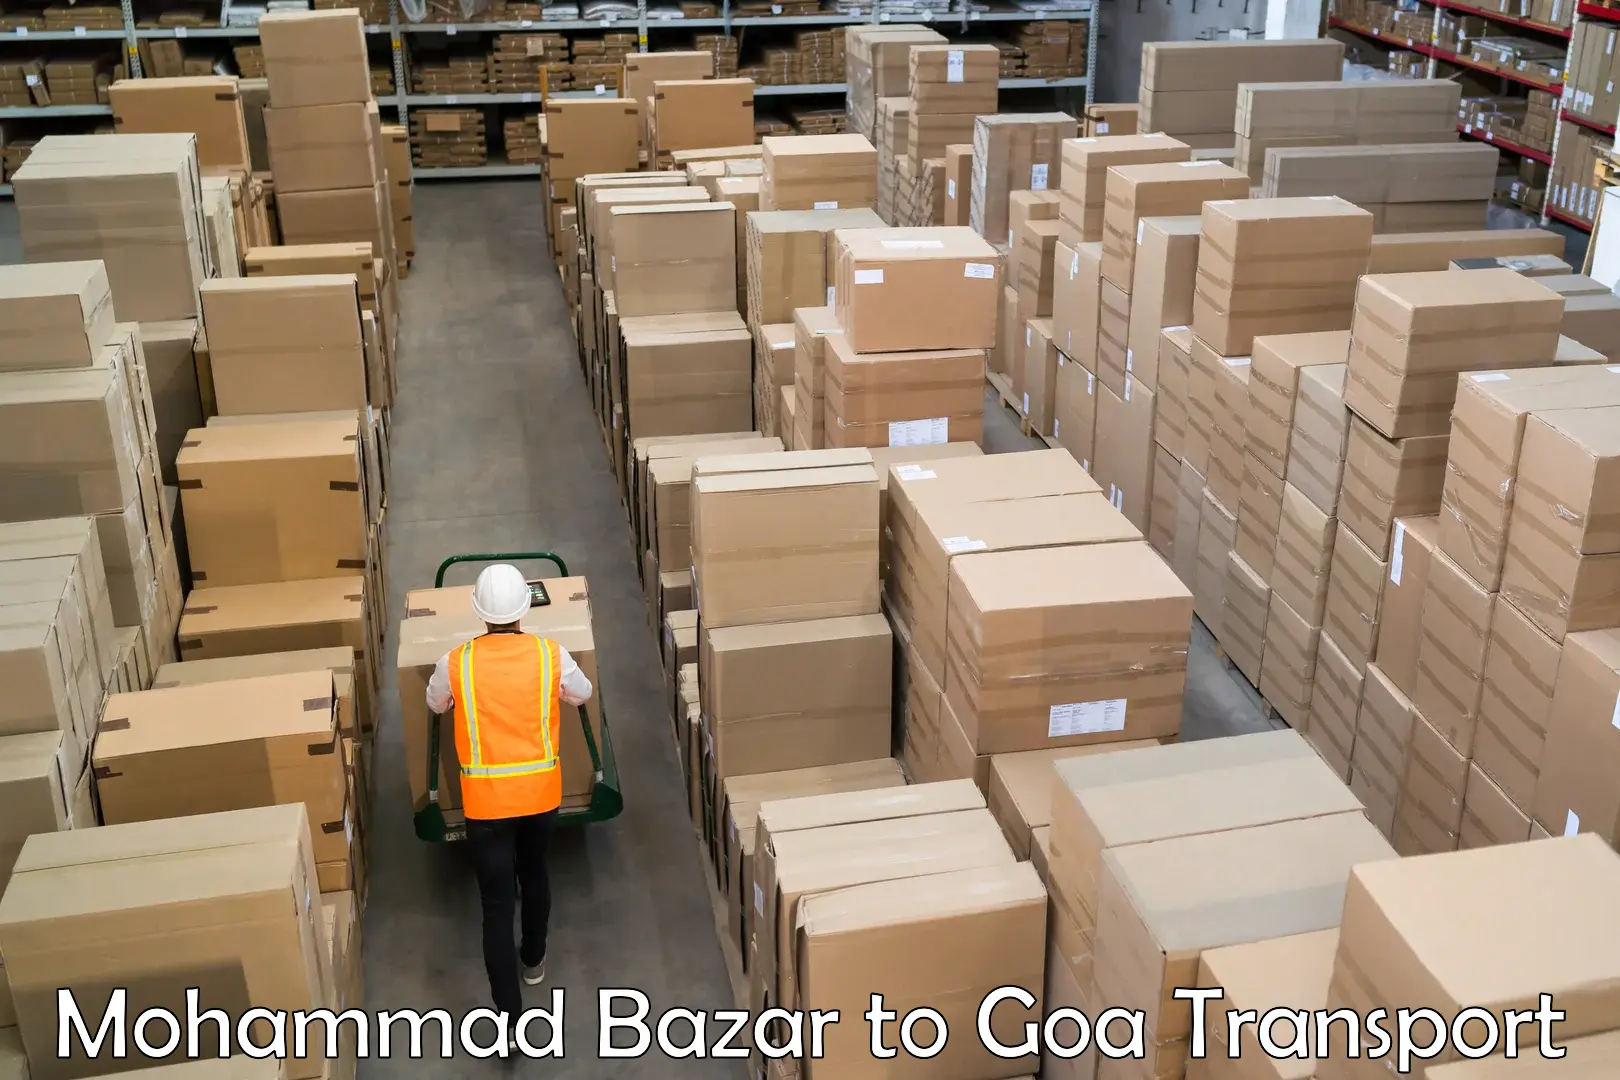 Goods delivery service Mohammad Bazar to Mormugao Port